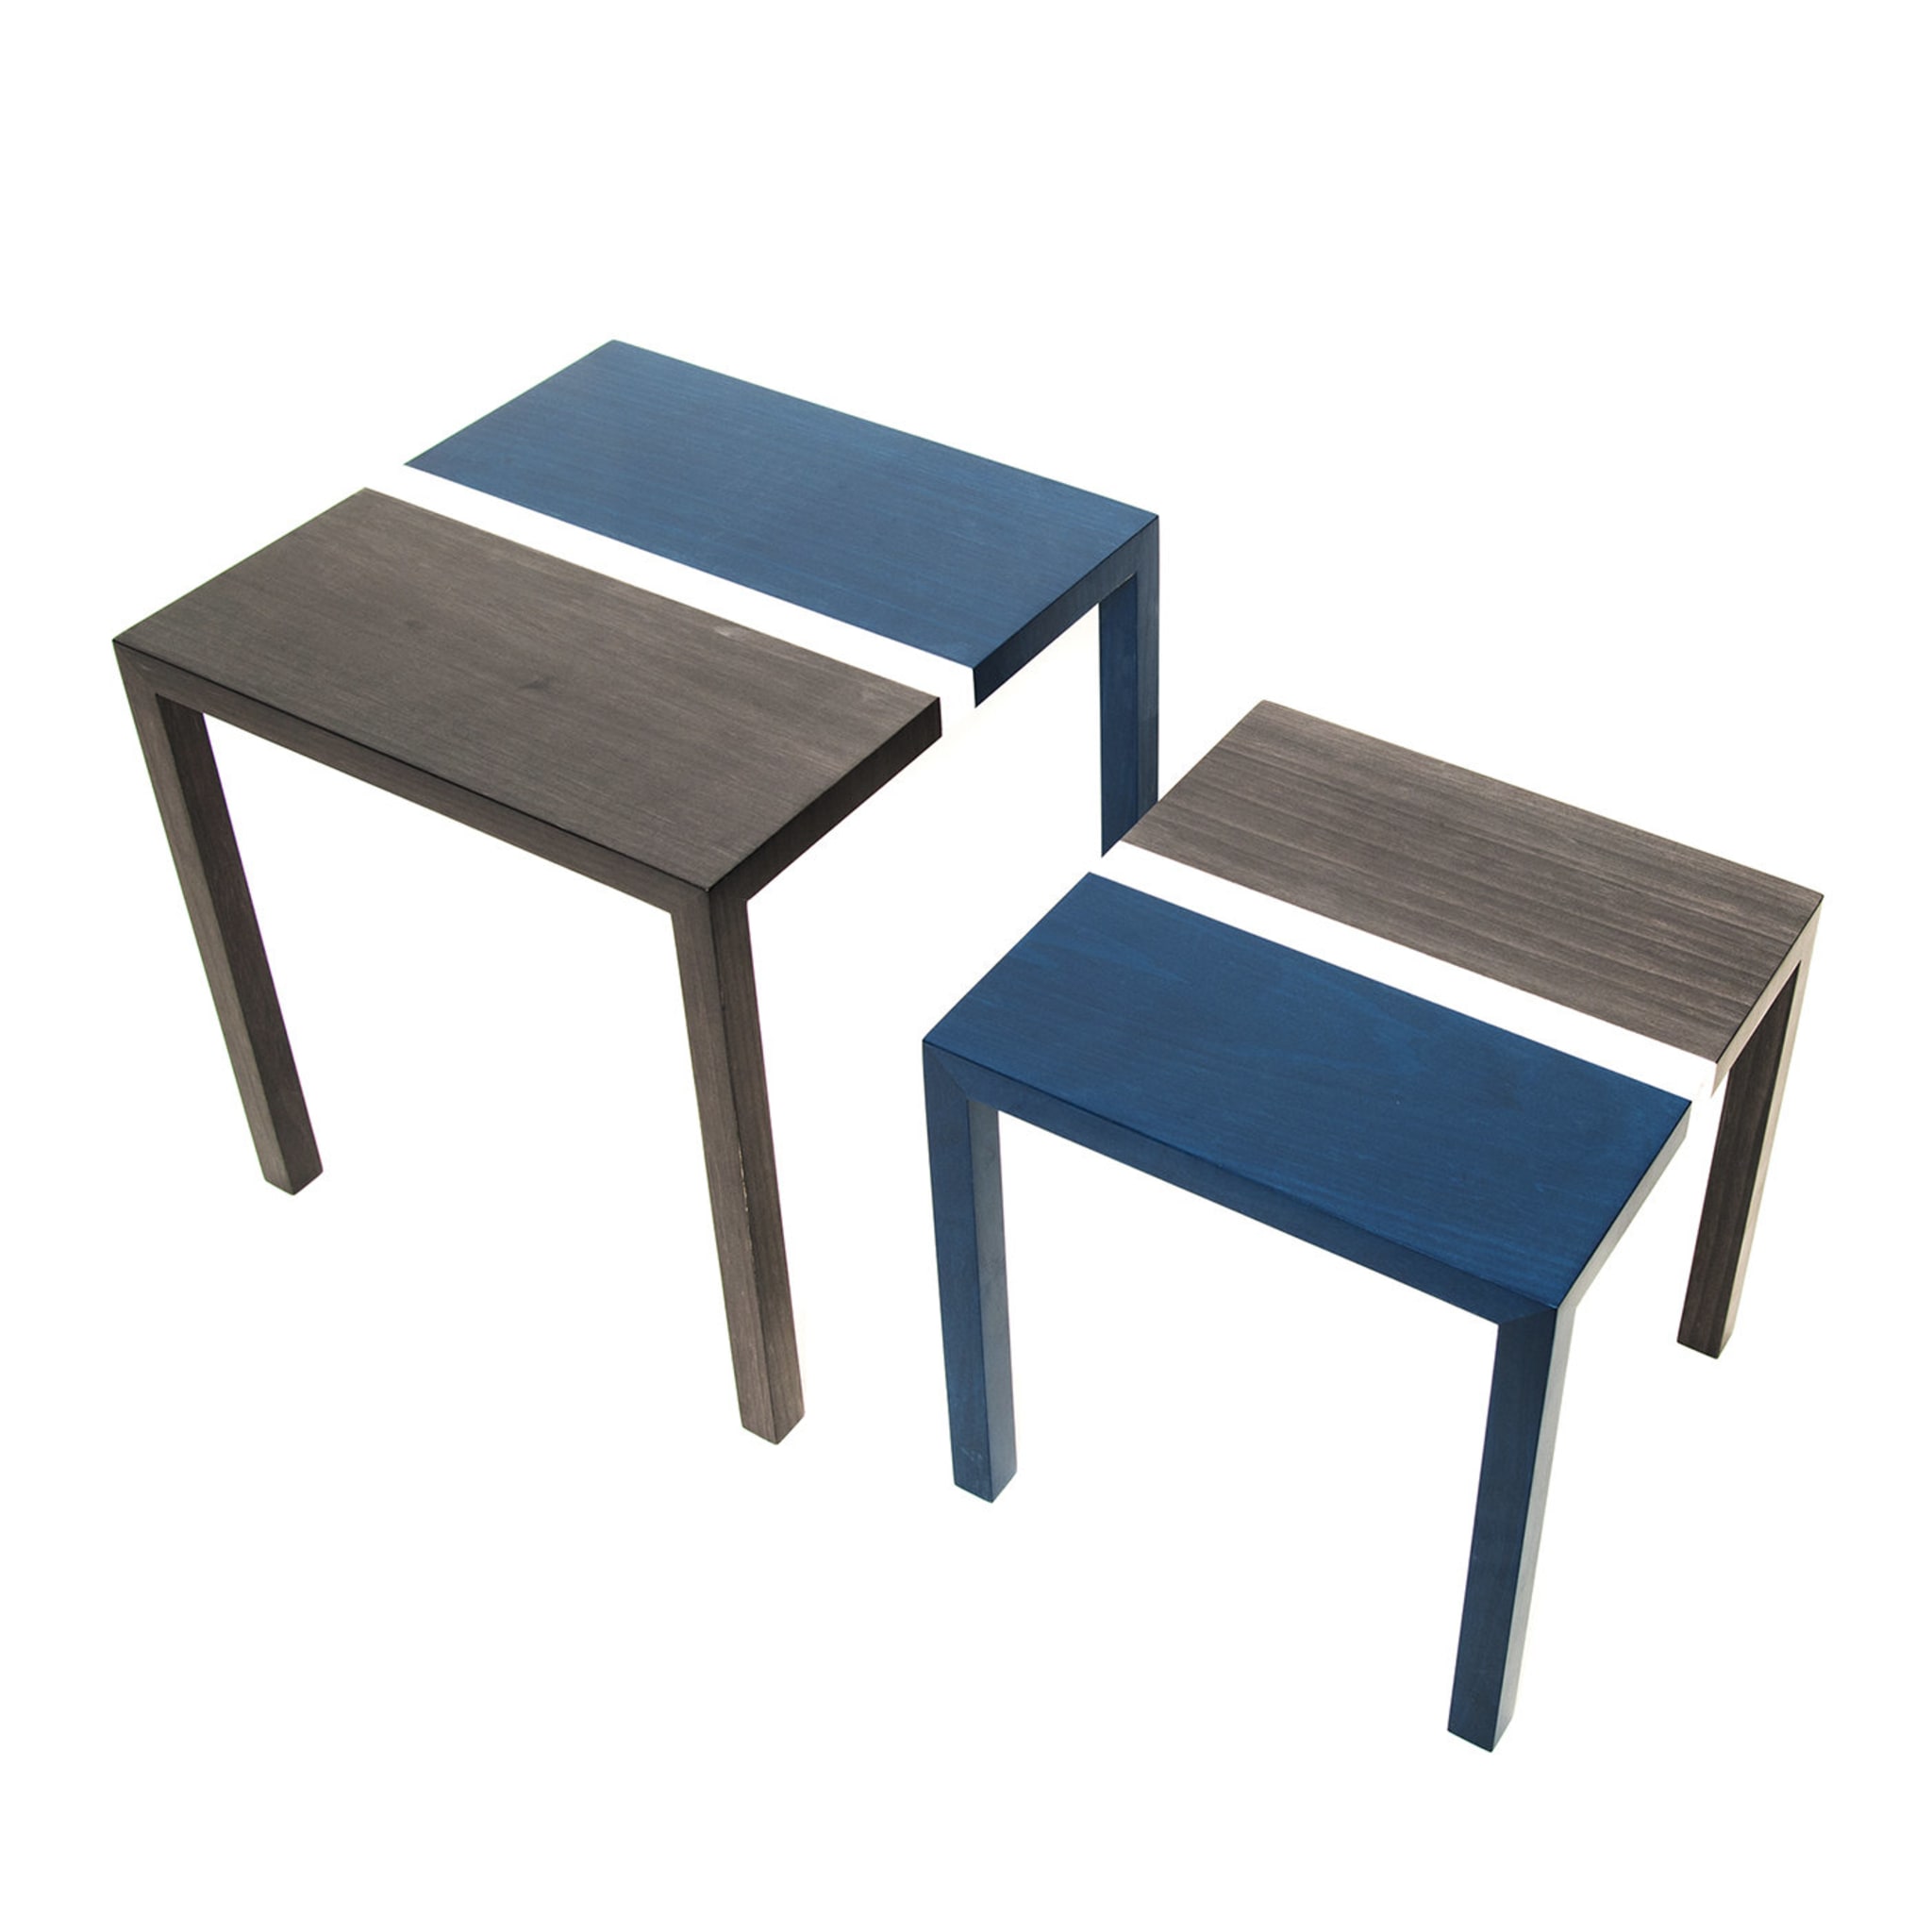 Partenope Blue and Gray Set of 2 Nesting Tables - Main view